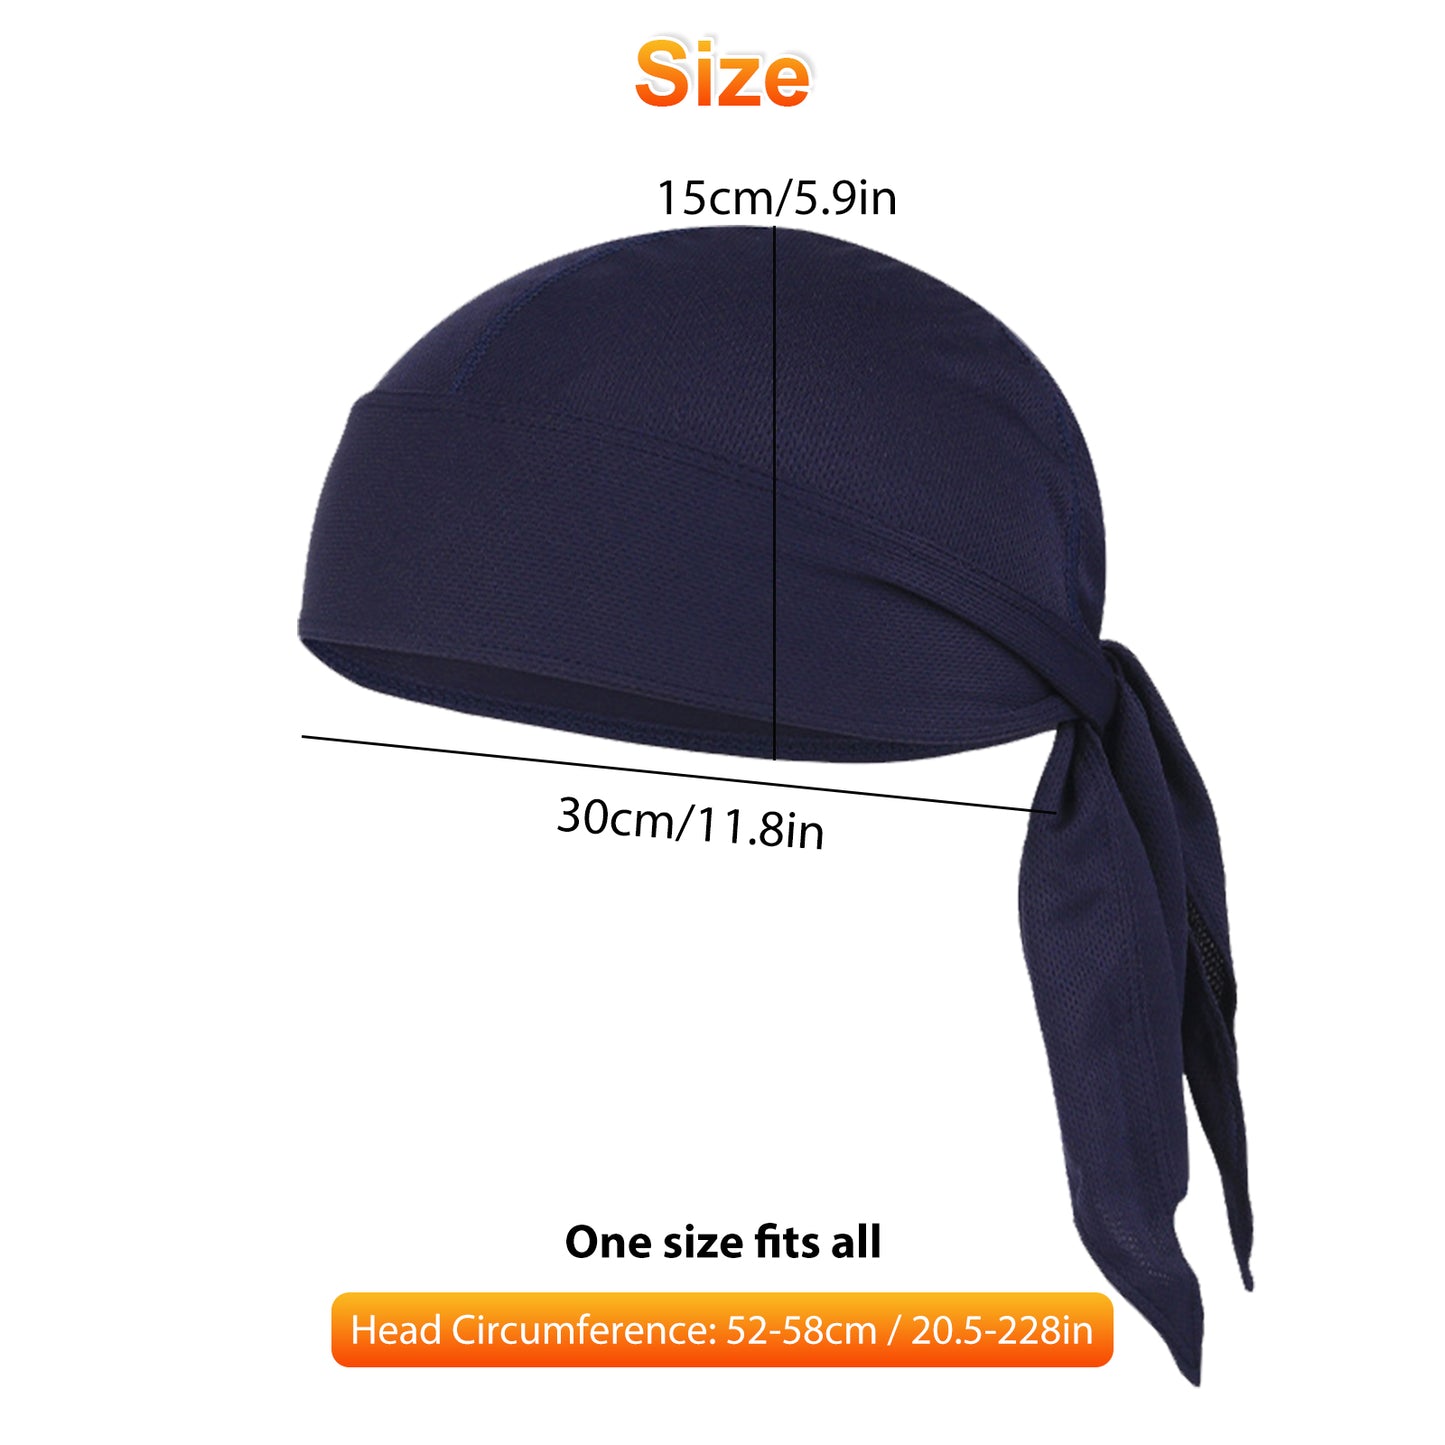 2pcs Turban Hat with adjustable tail